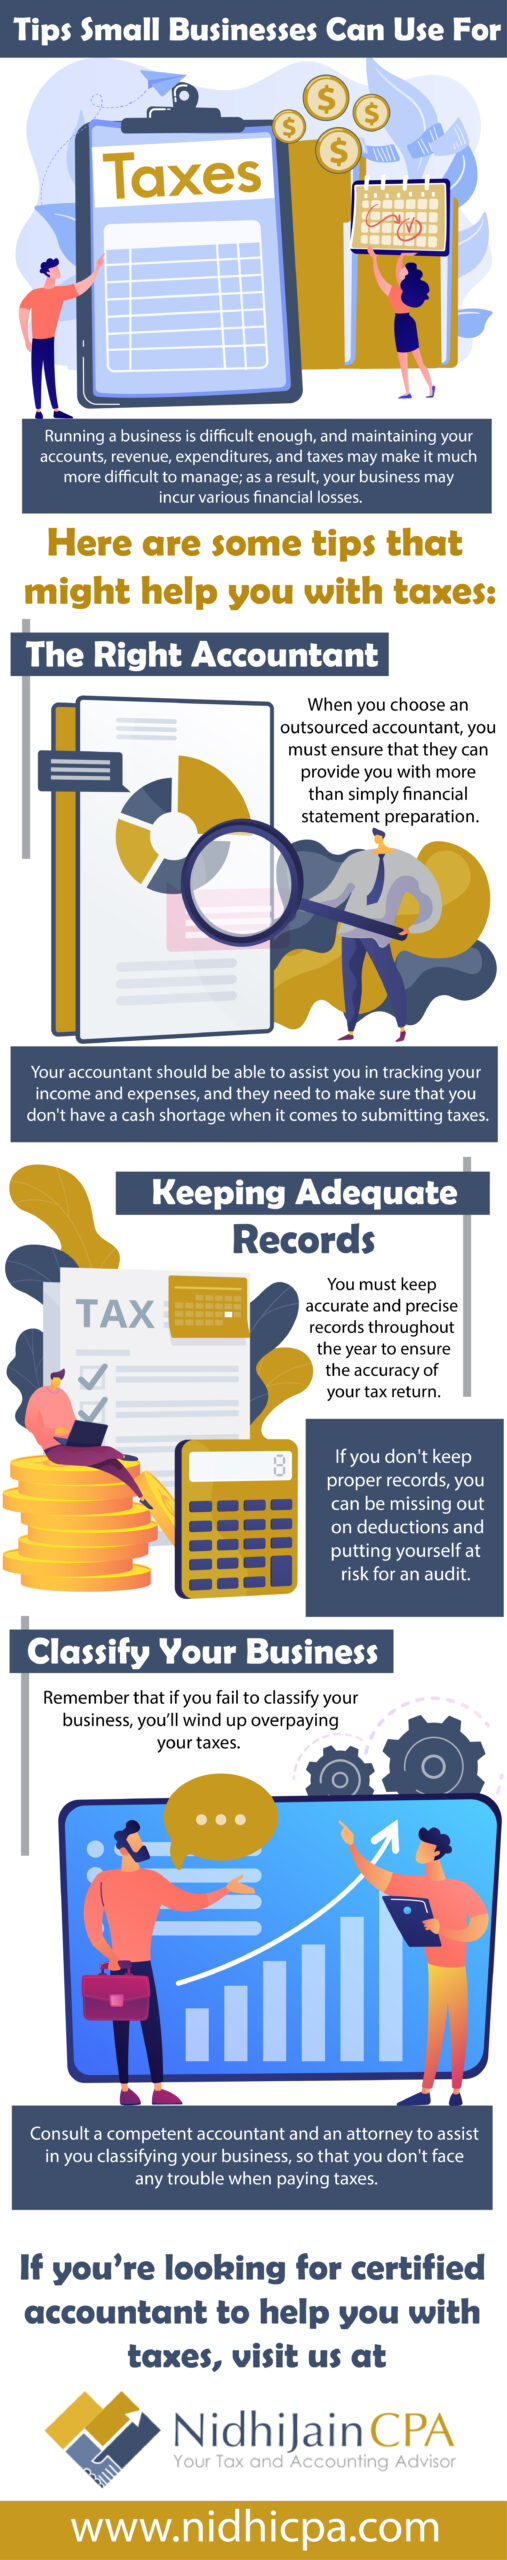 Tips Small Business Can Use For Taxes